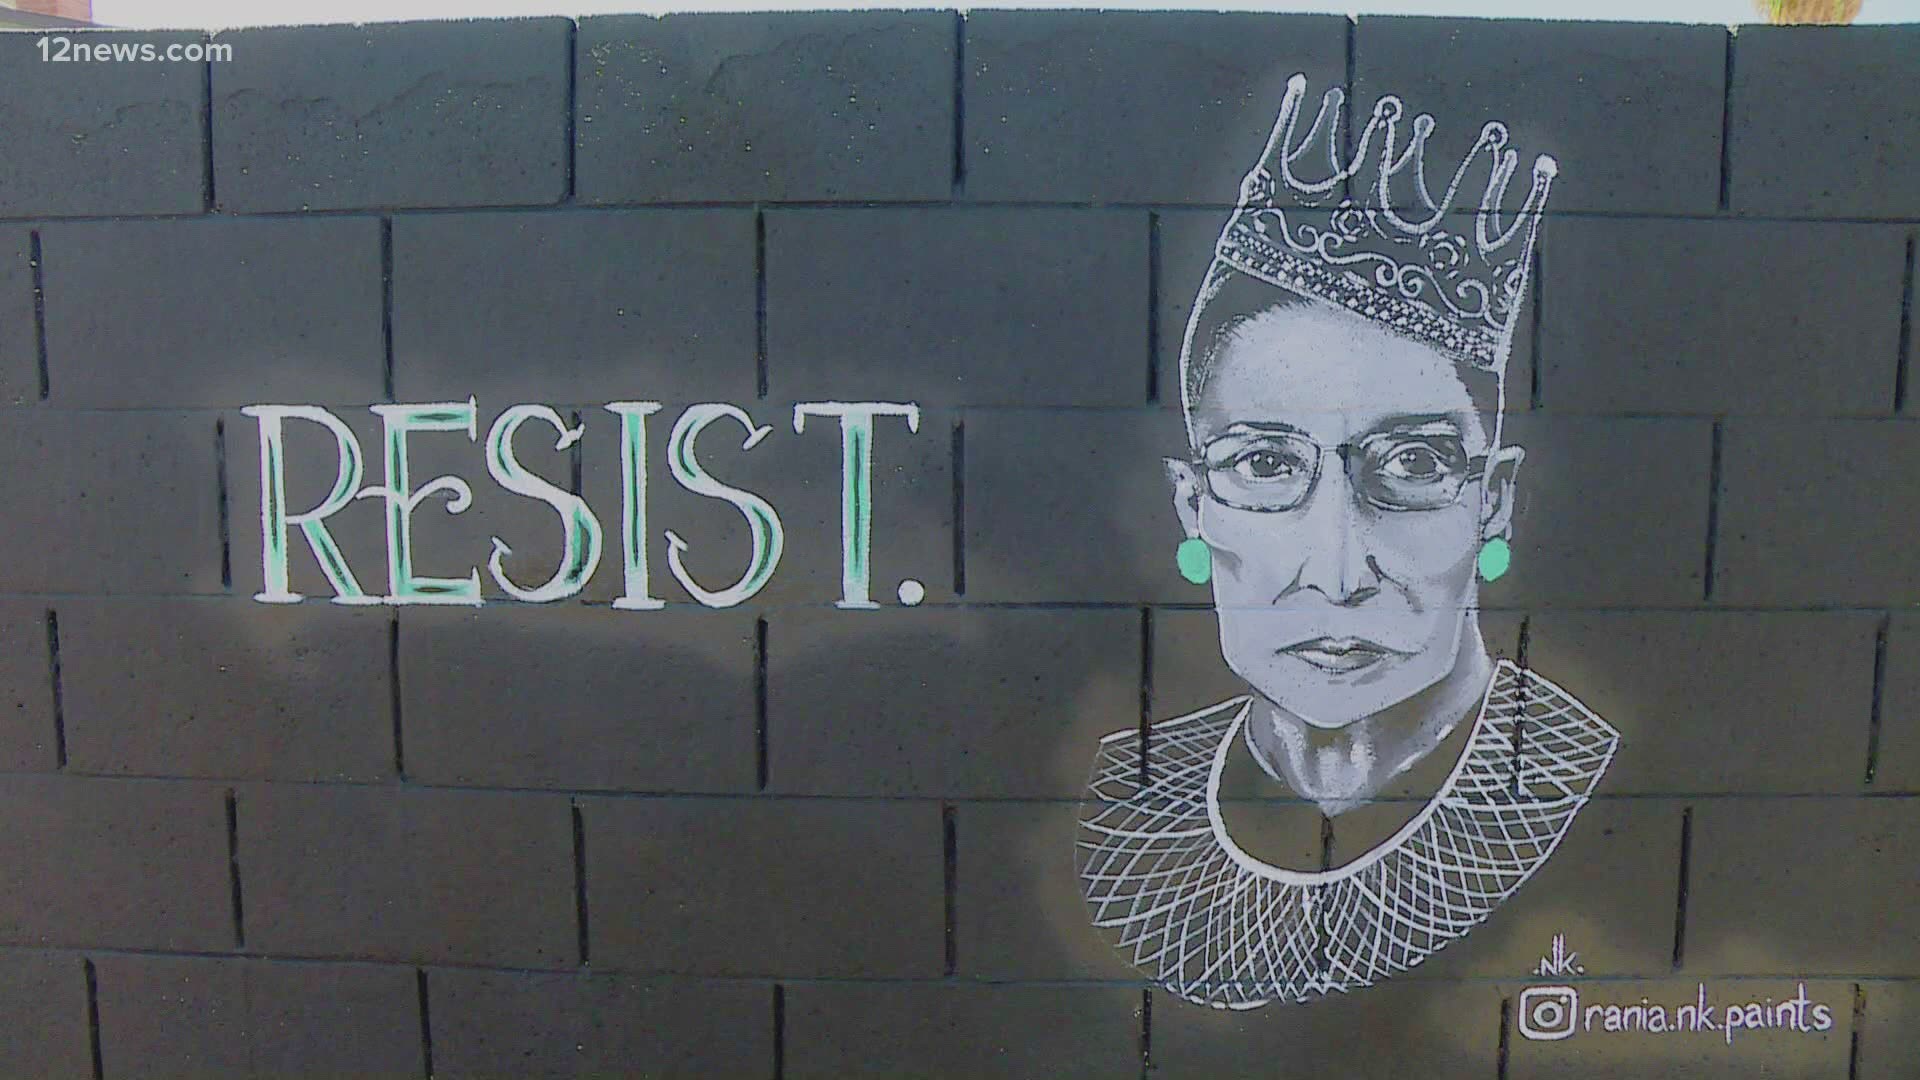 Here in the Valley, a local artist is honoring the legacy of Ruth Bader Ginsburg with a mural. It's meant to give people hope while remembering an American hero.